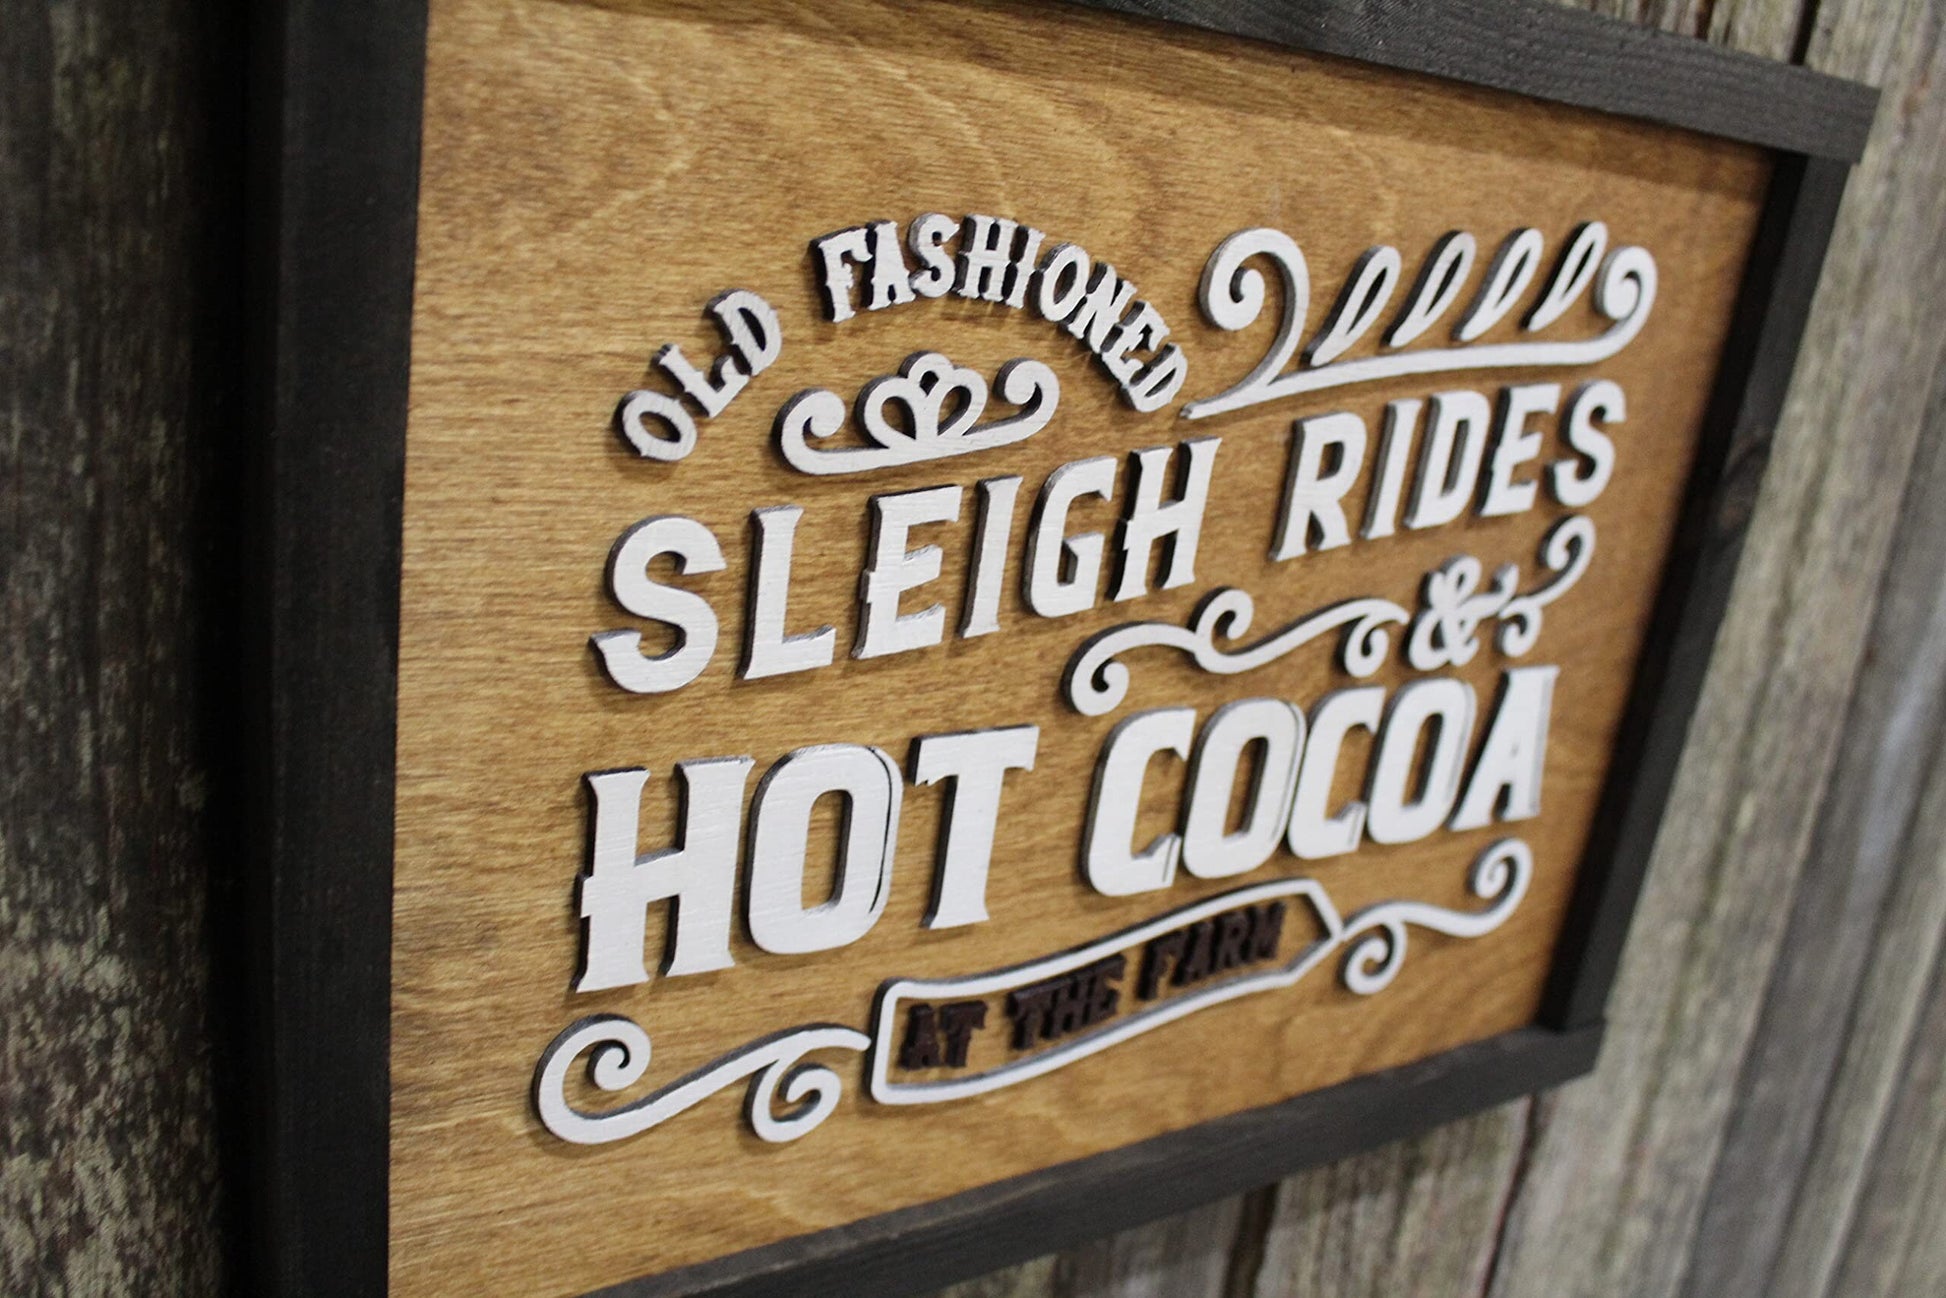 Sleigh Rides Hot Cocoa Wood Sign Chocolate Winter Cold Brr On The Farm Christmas Advertising Sign 3D Raised Text Country Cabin Decor